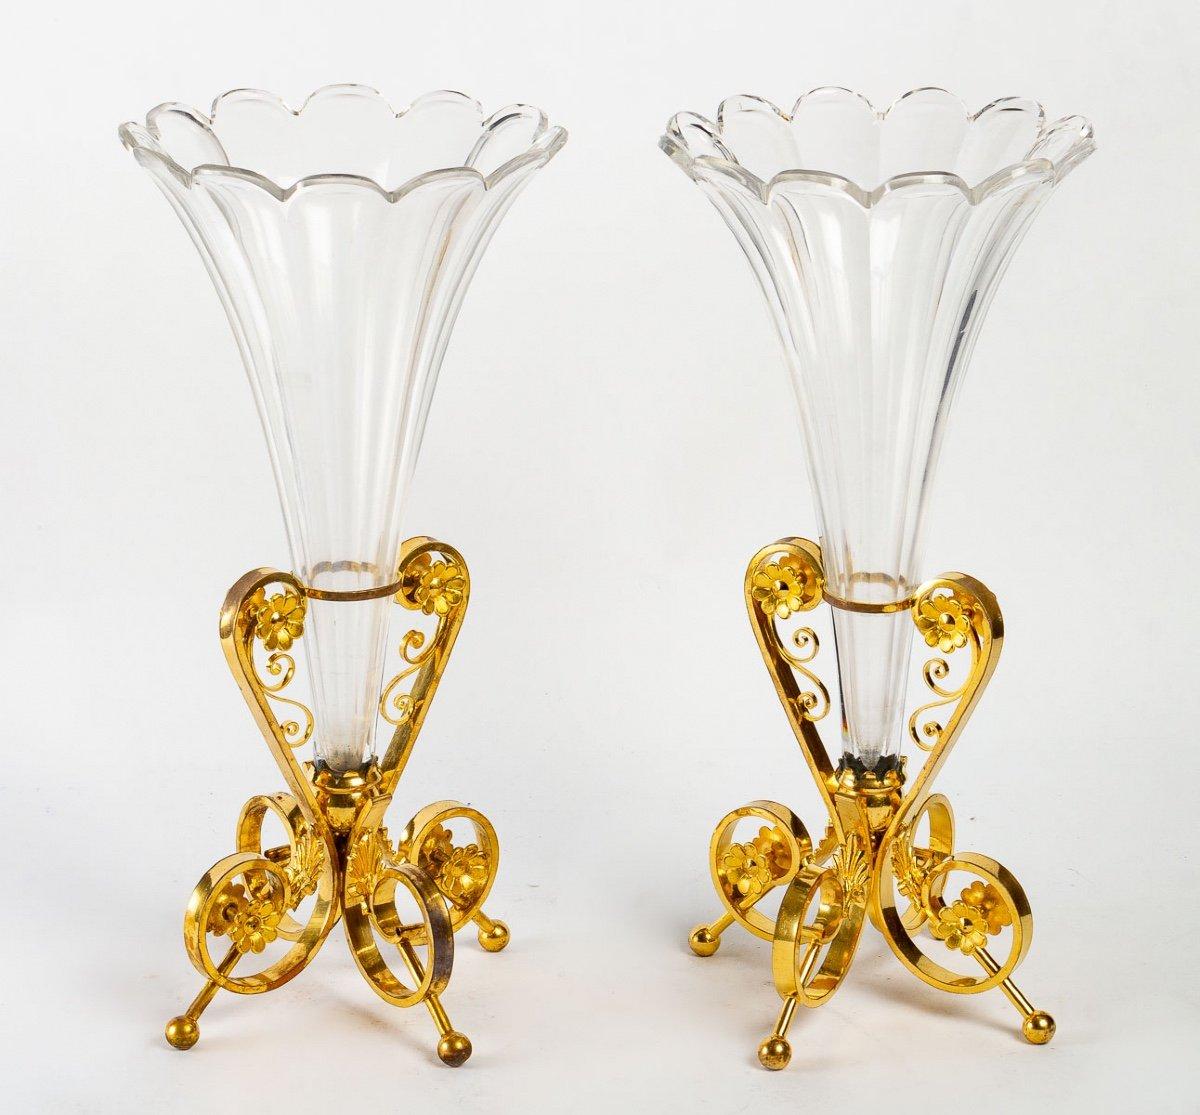 Pair of crystal vases
Napoleon III period, late 19th century.
In perfect condition.
Diameter : 19 cm
Height : 40 cm.